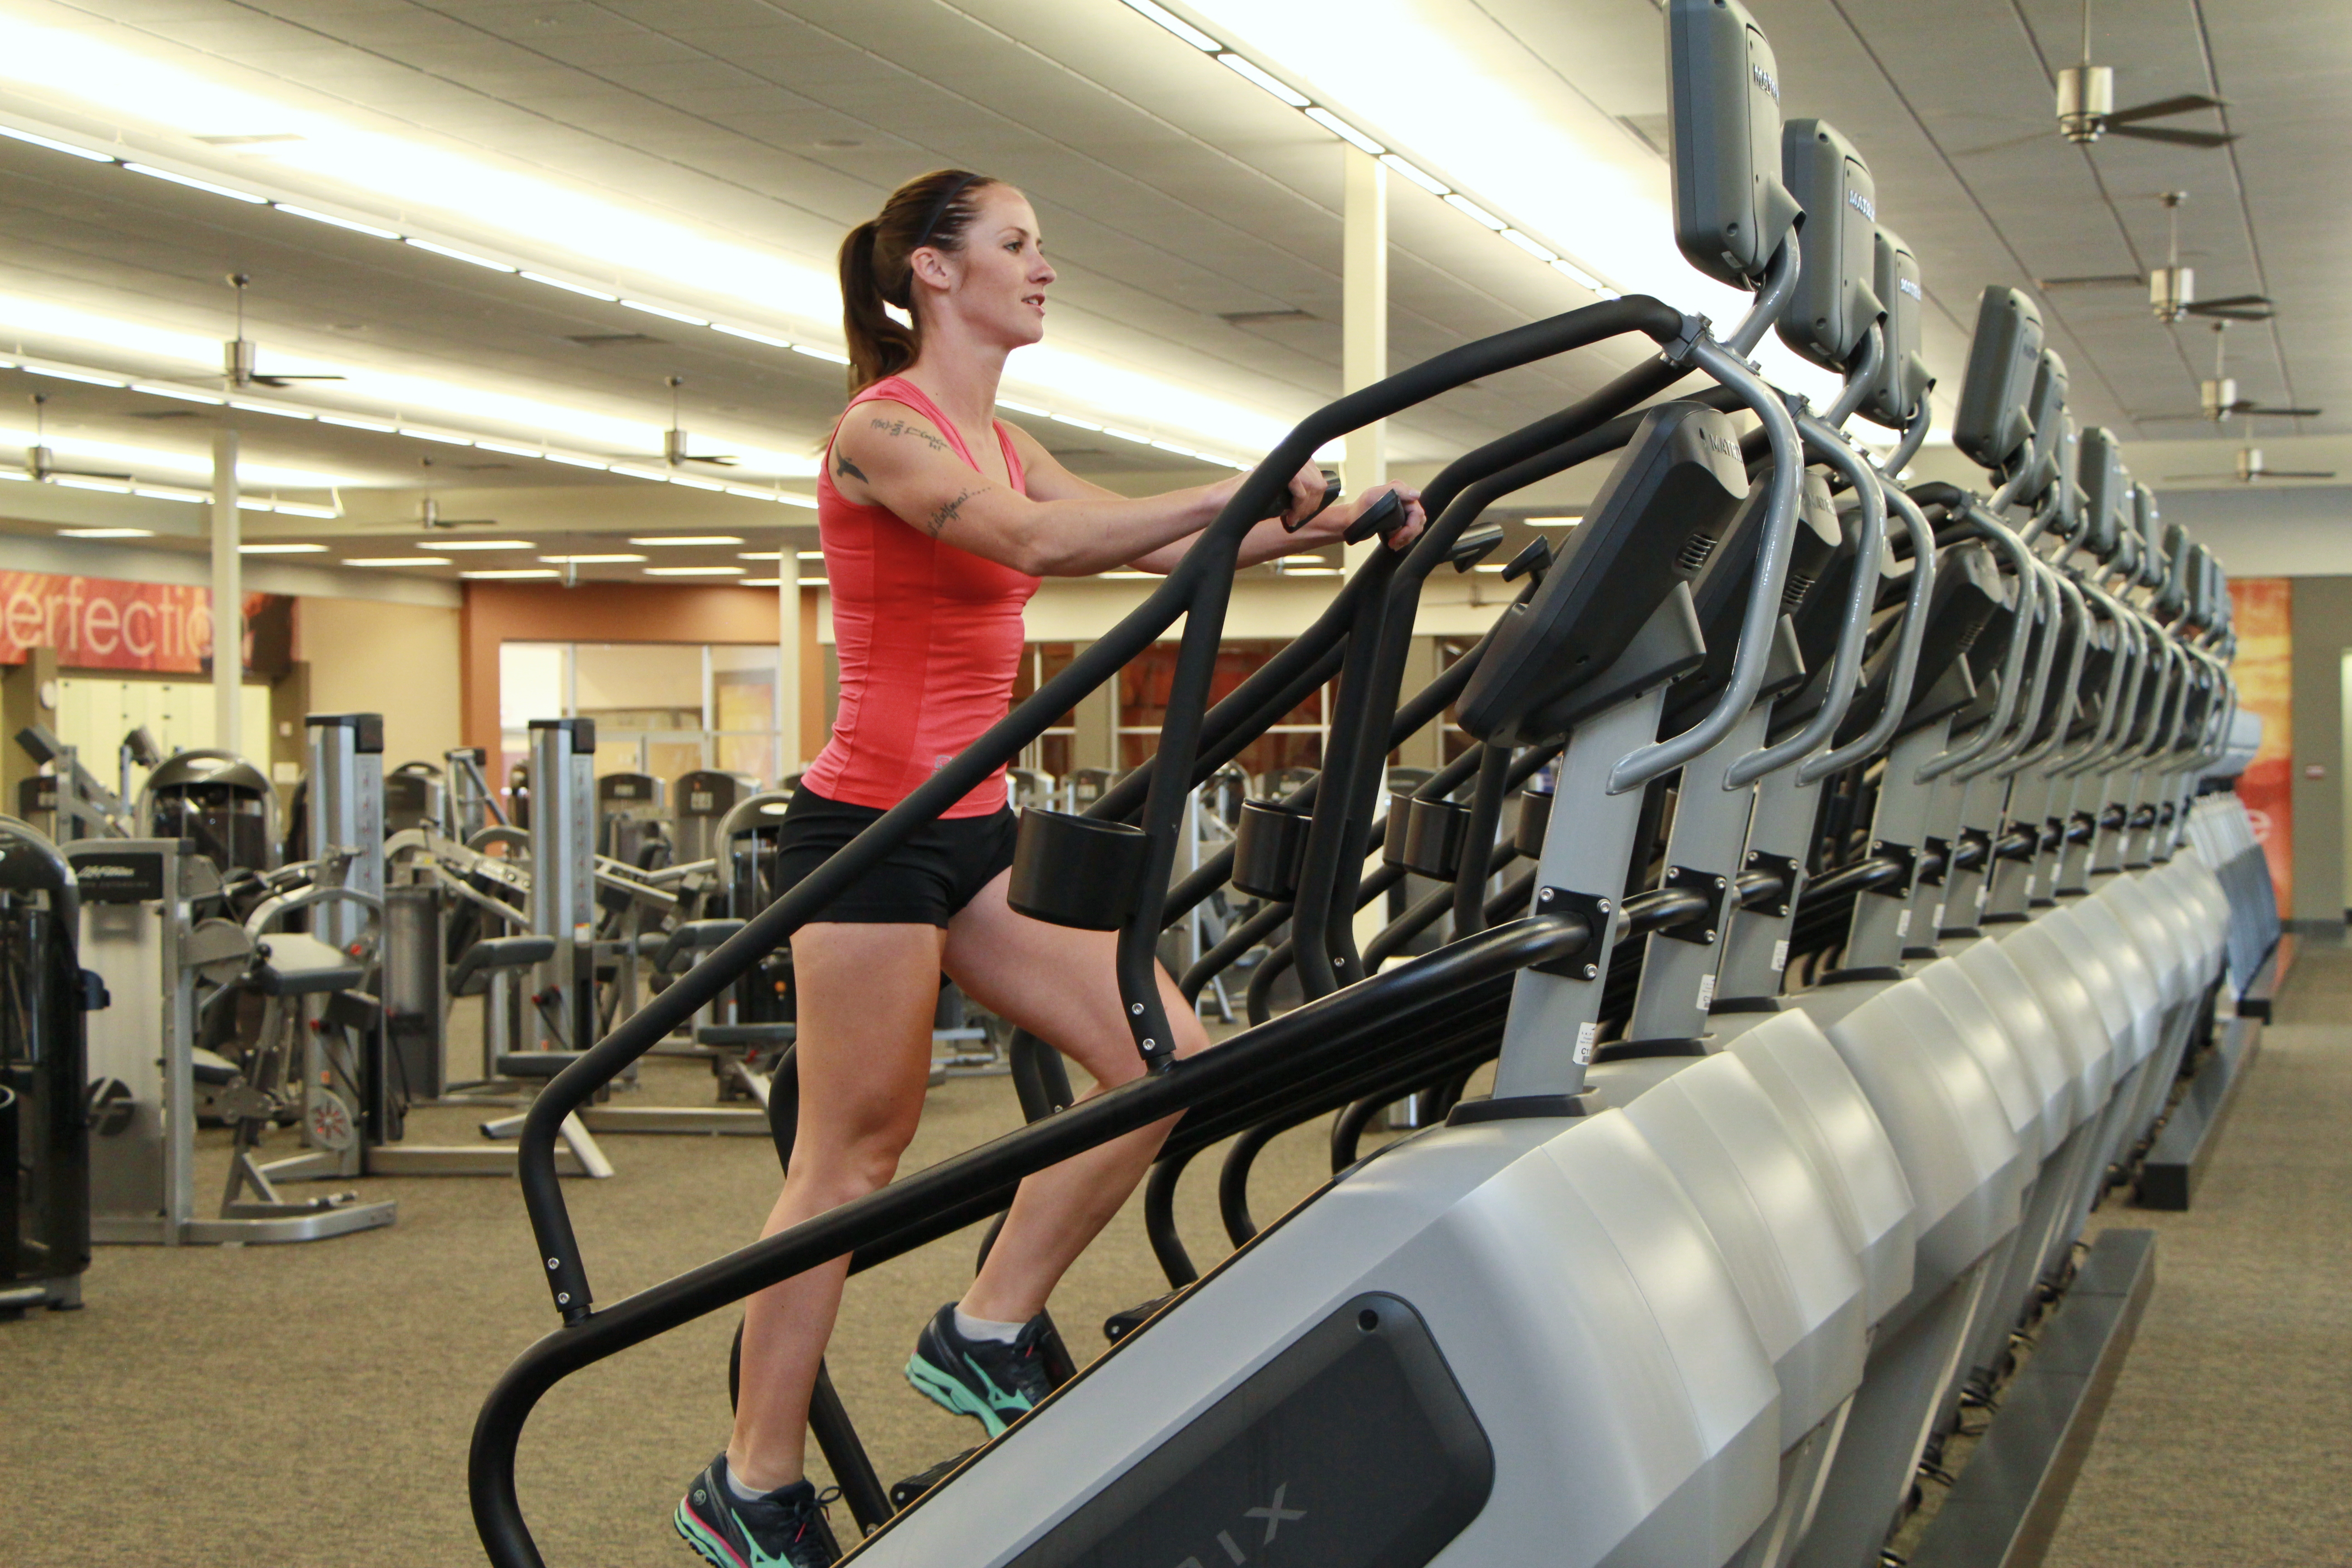  Stepmill Workout Routine for Push Pull Legs